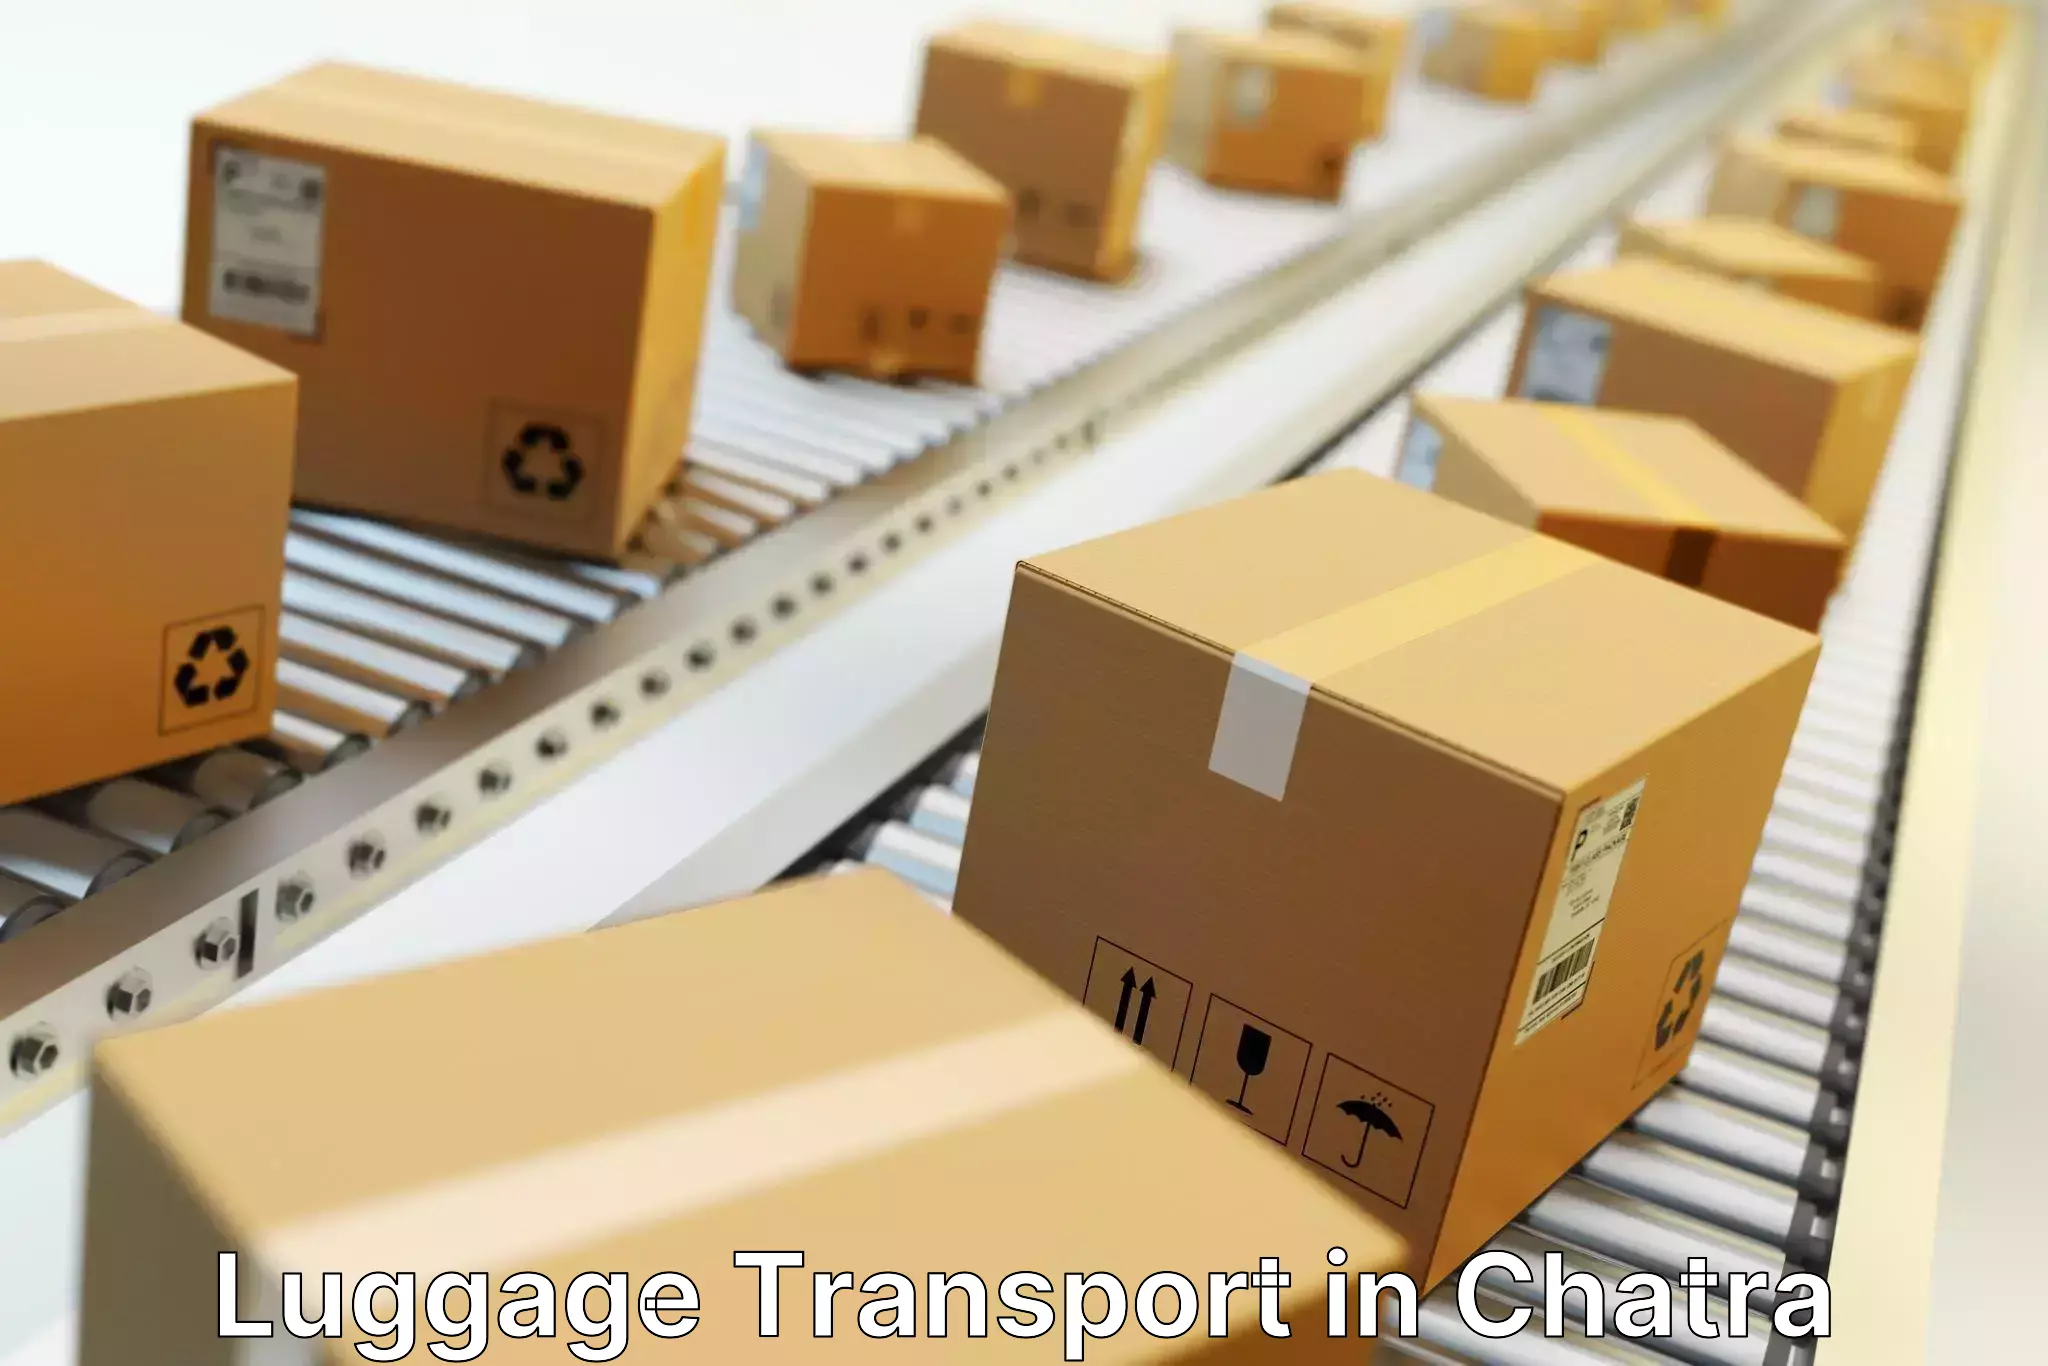 Luggage shipping planner in Chatra